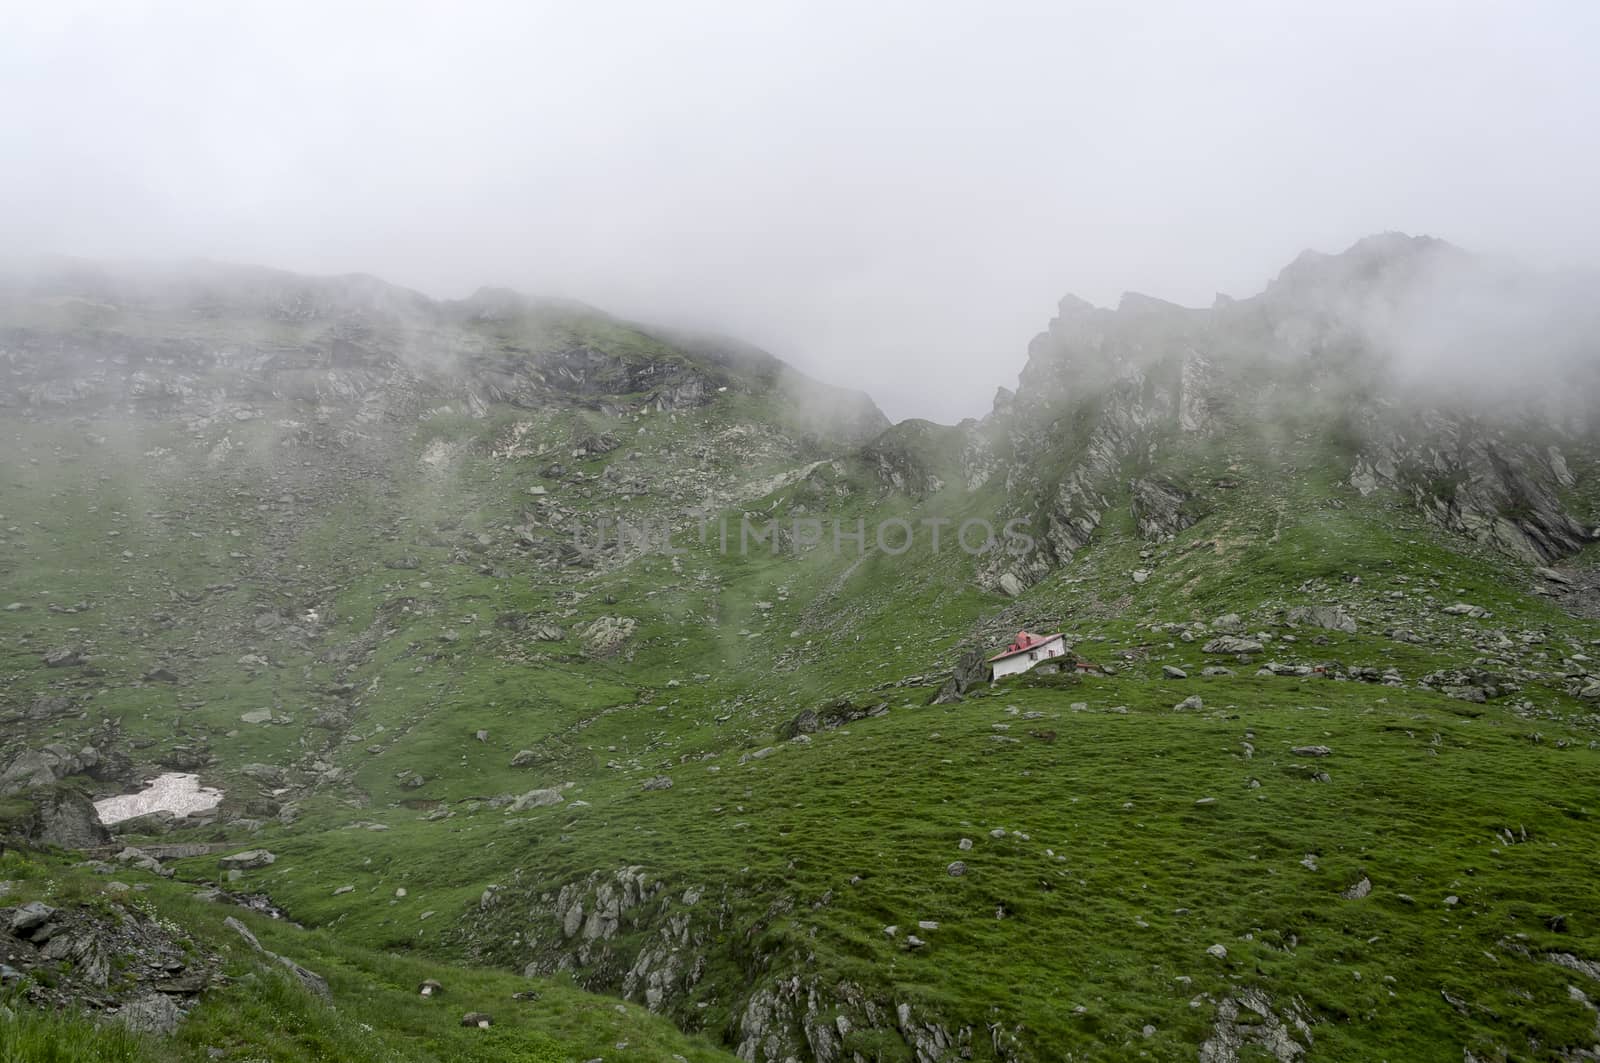 Morning mountain landscape with fog and a small building